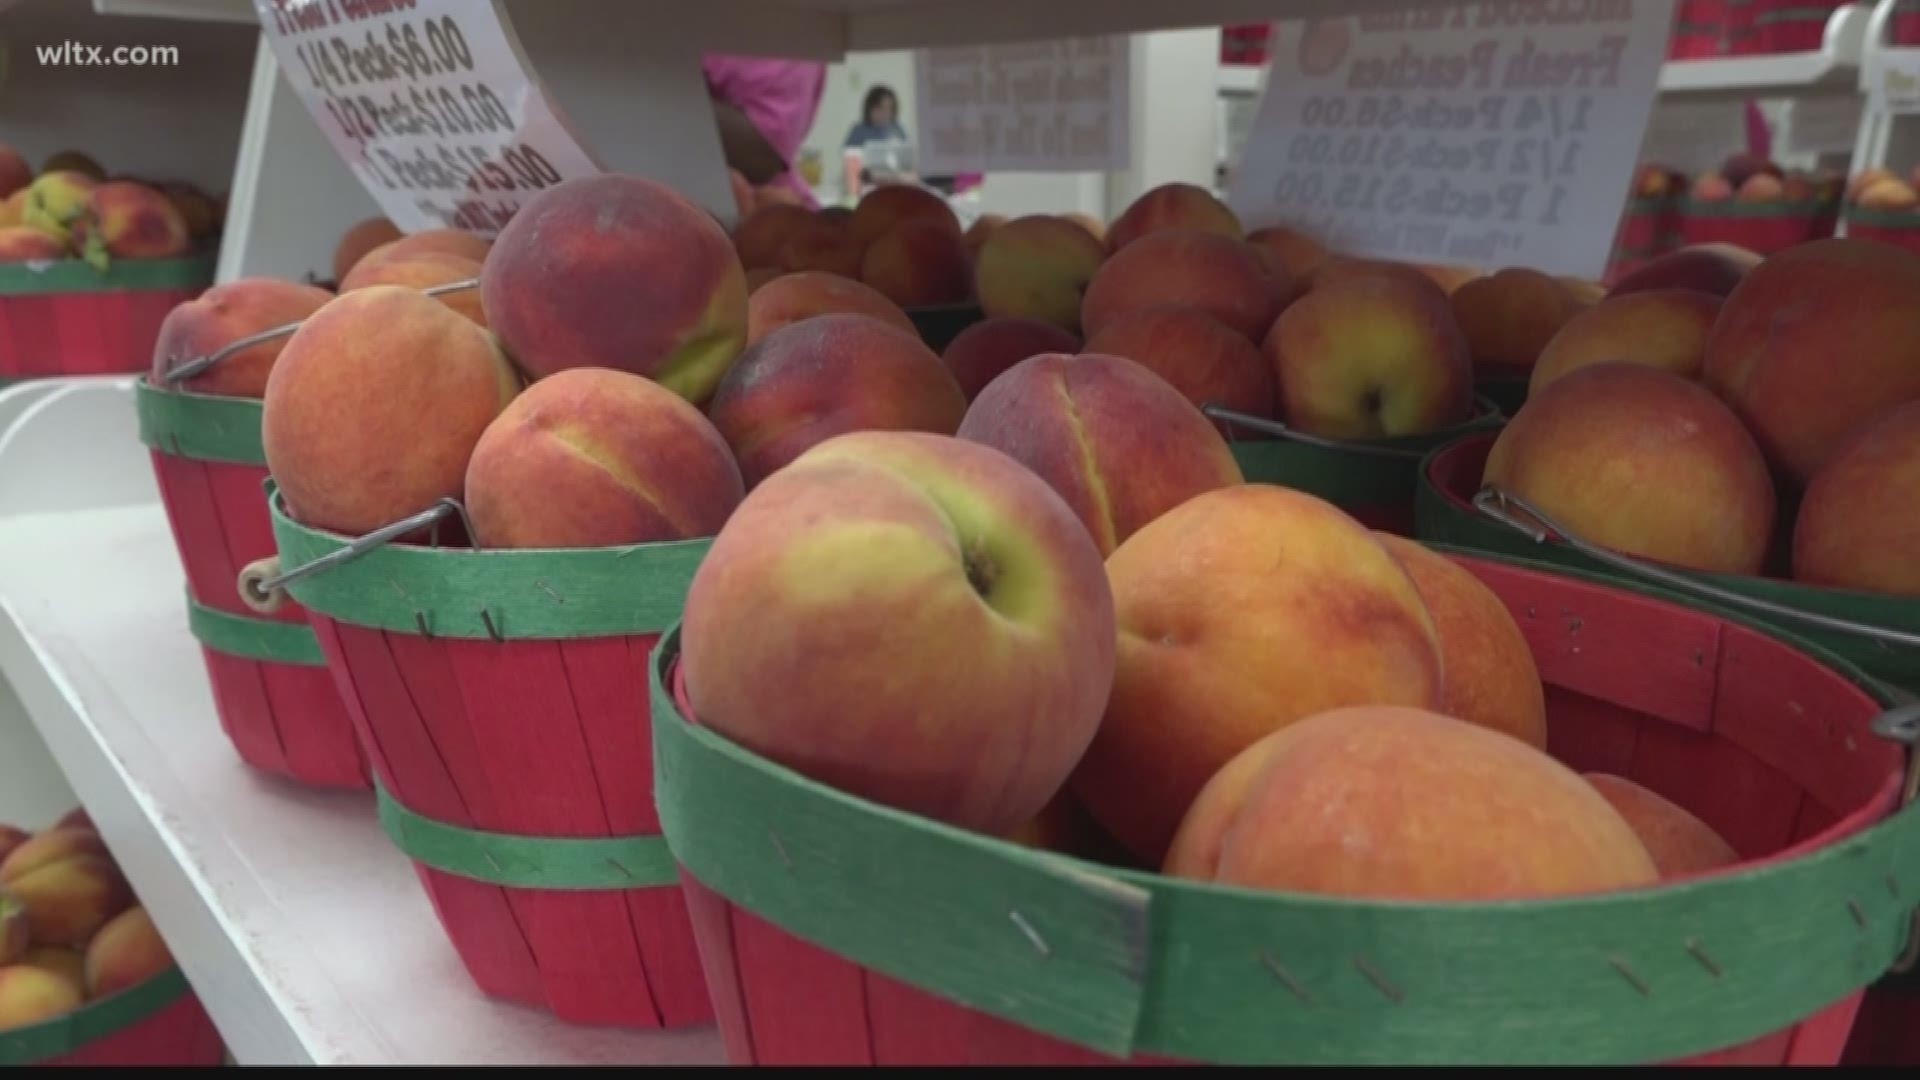 It's peach season and one popular spot people like to go is McLeod farms in Mcbee